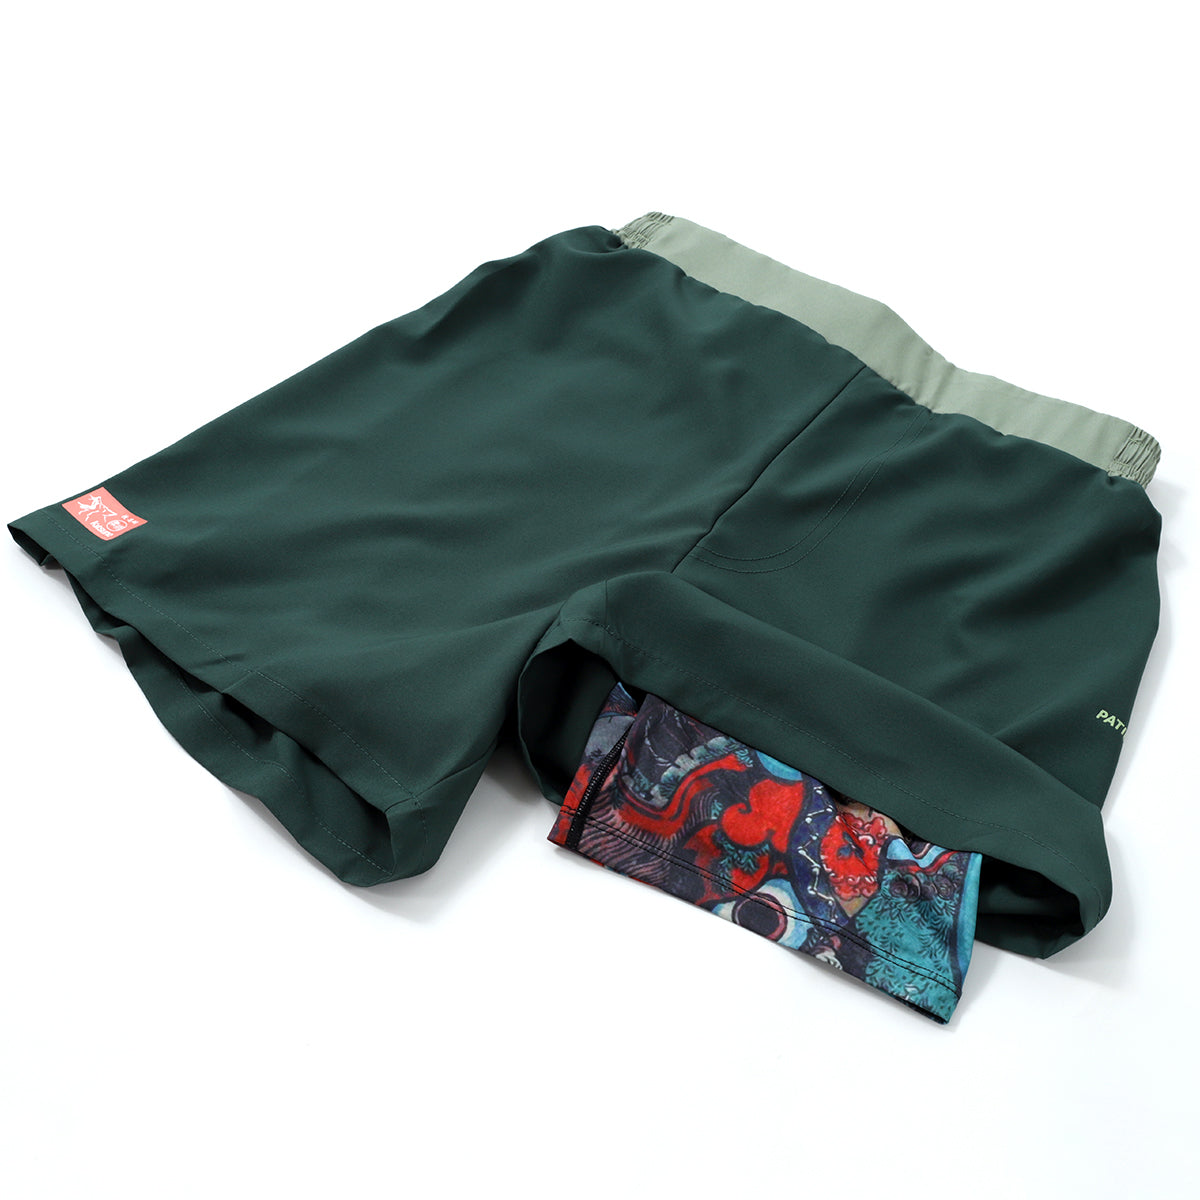 Kitsune "Red Skies" Compression-Lined Shorts - Olive Green